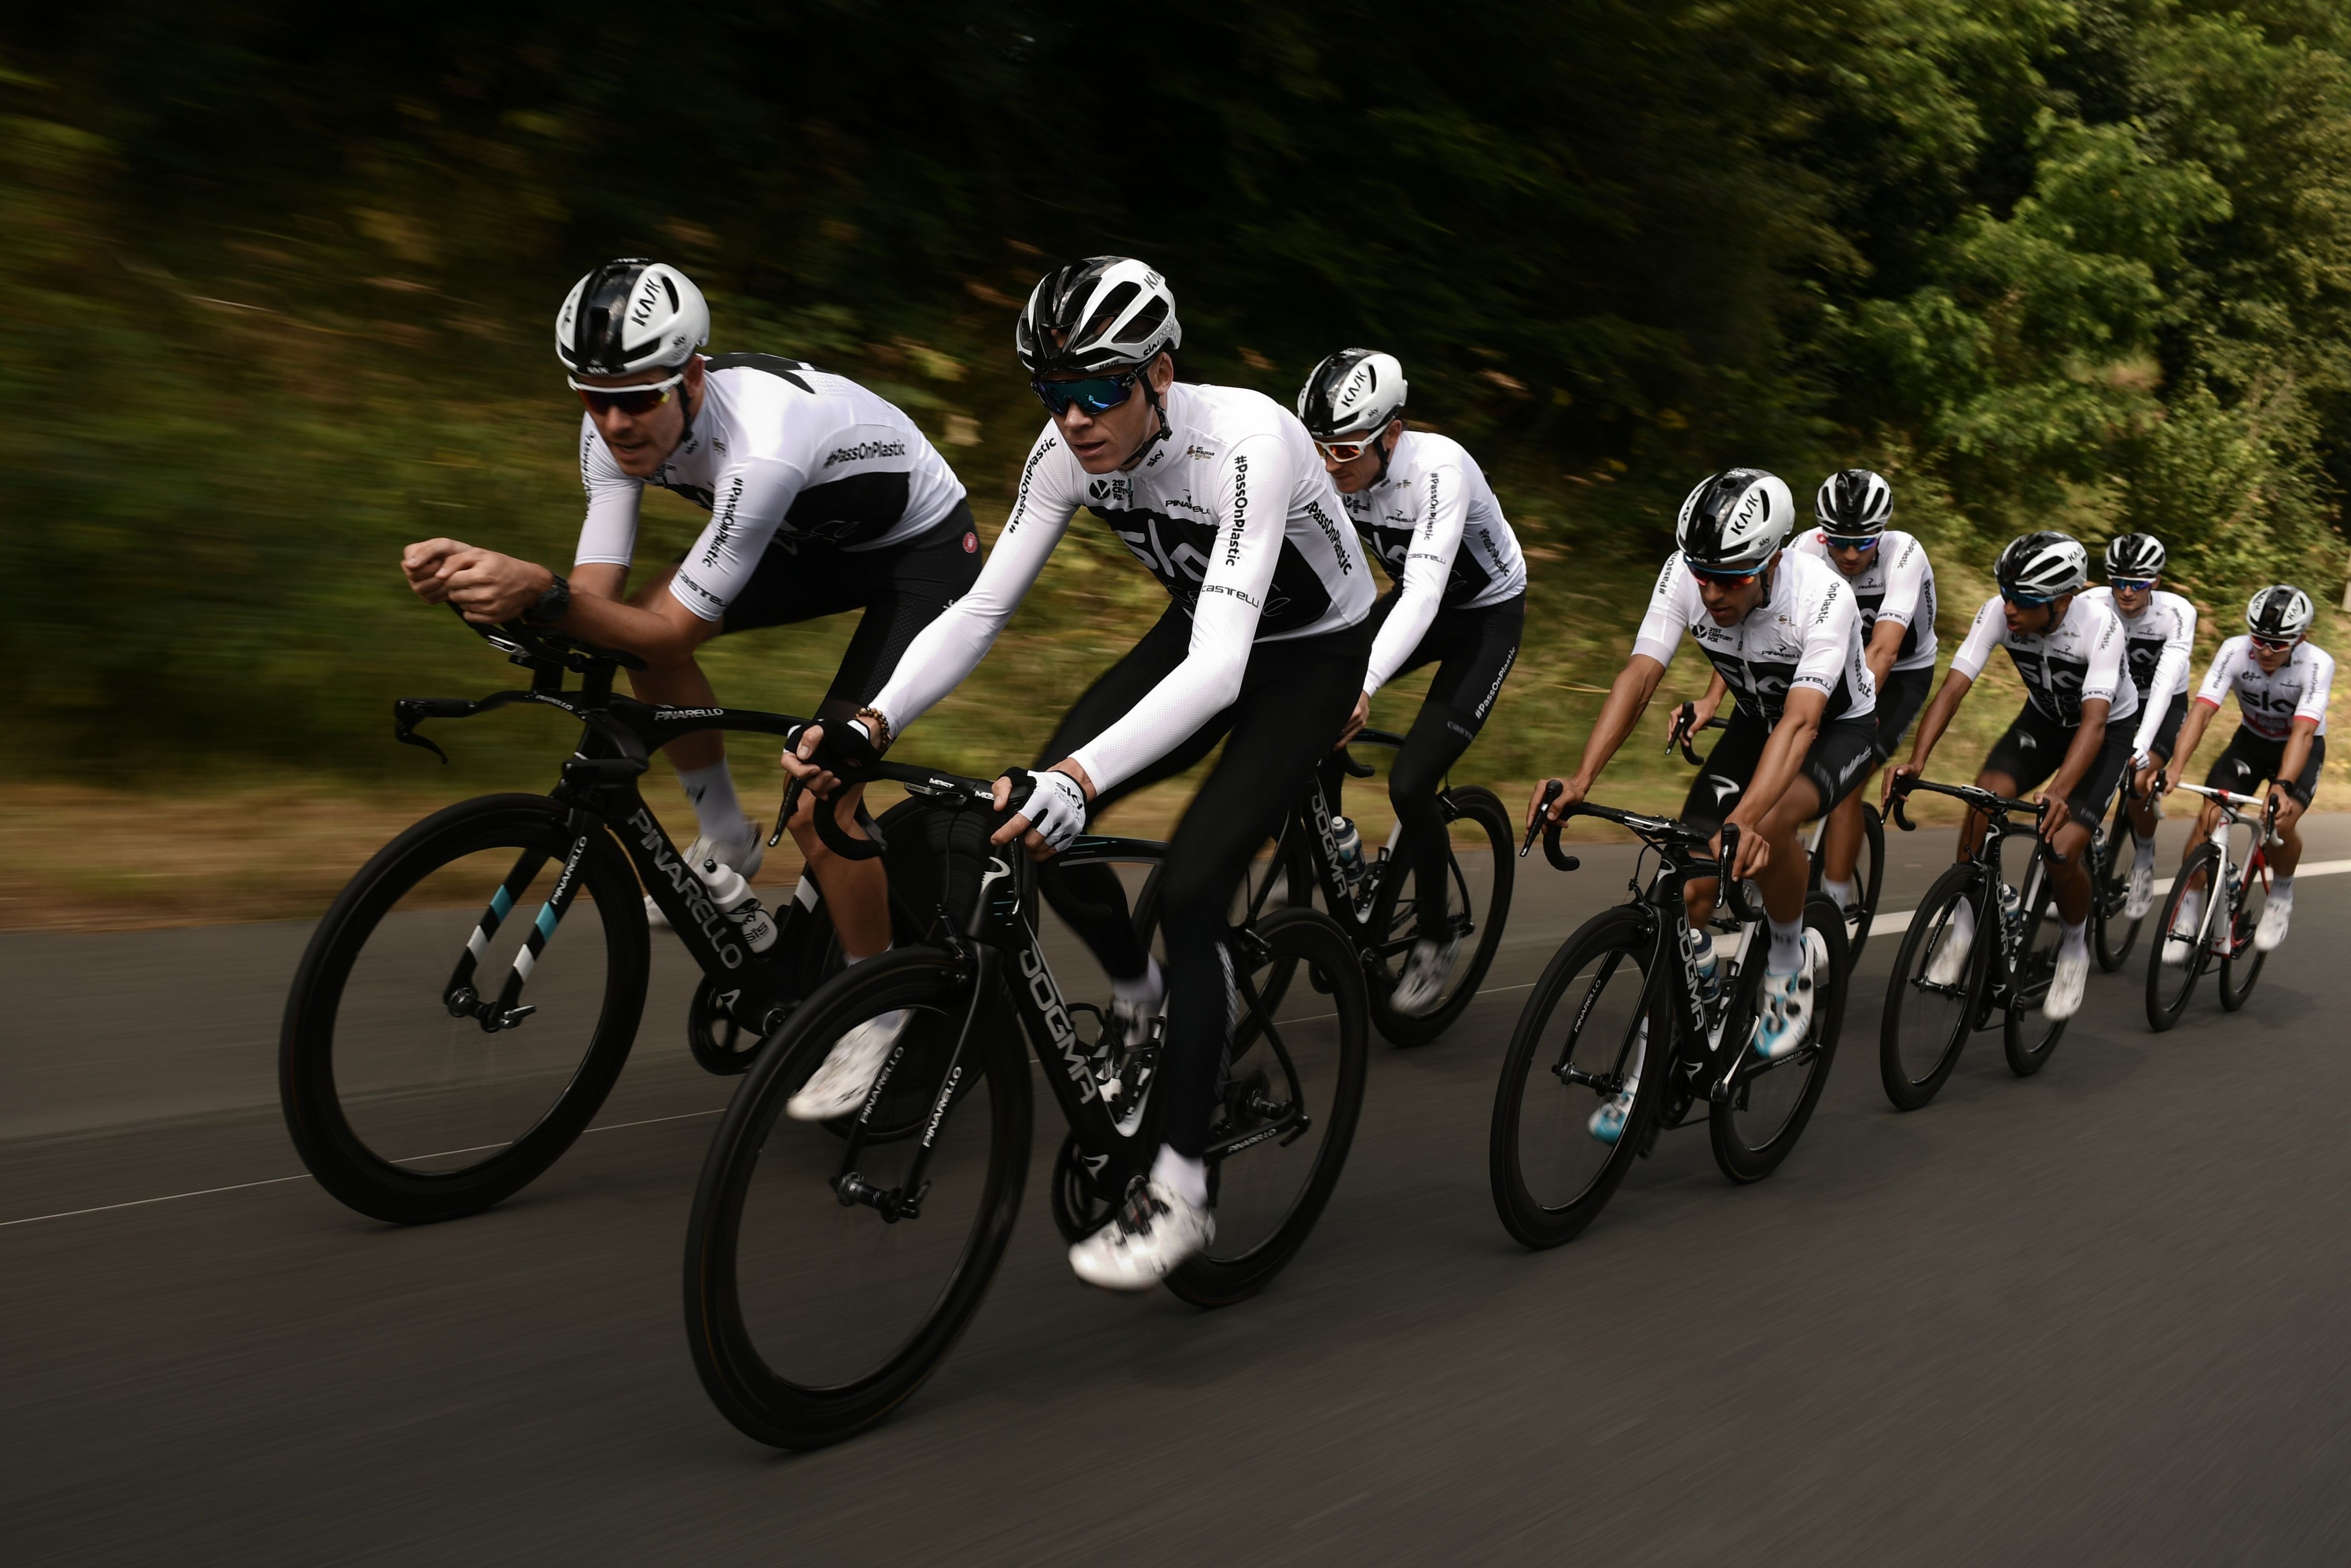 Great Britain's Christopher Froome (Front C), Great Britain's Luke Rowe (L) and their Great Britain's Team Sky cycling team teammates ride during a training session on July 6, 2018 near Saint-Mars la Reorthe, western France, on the eve of the start of the 105th edition of the Tour de France cycling race. (PHILIPPE LOPEZ—AFP/Getty Images)